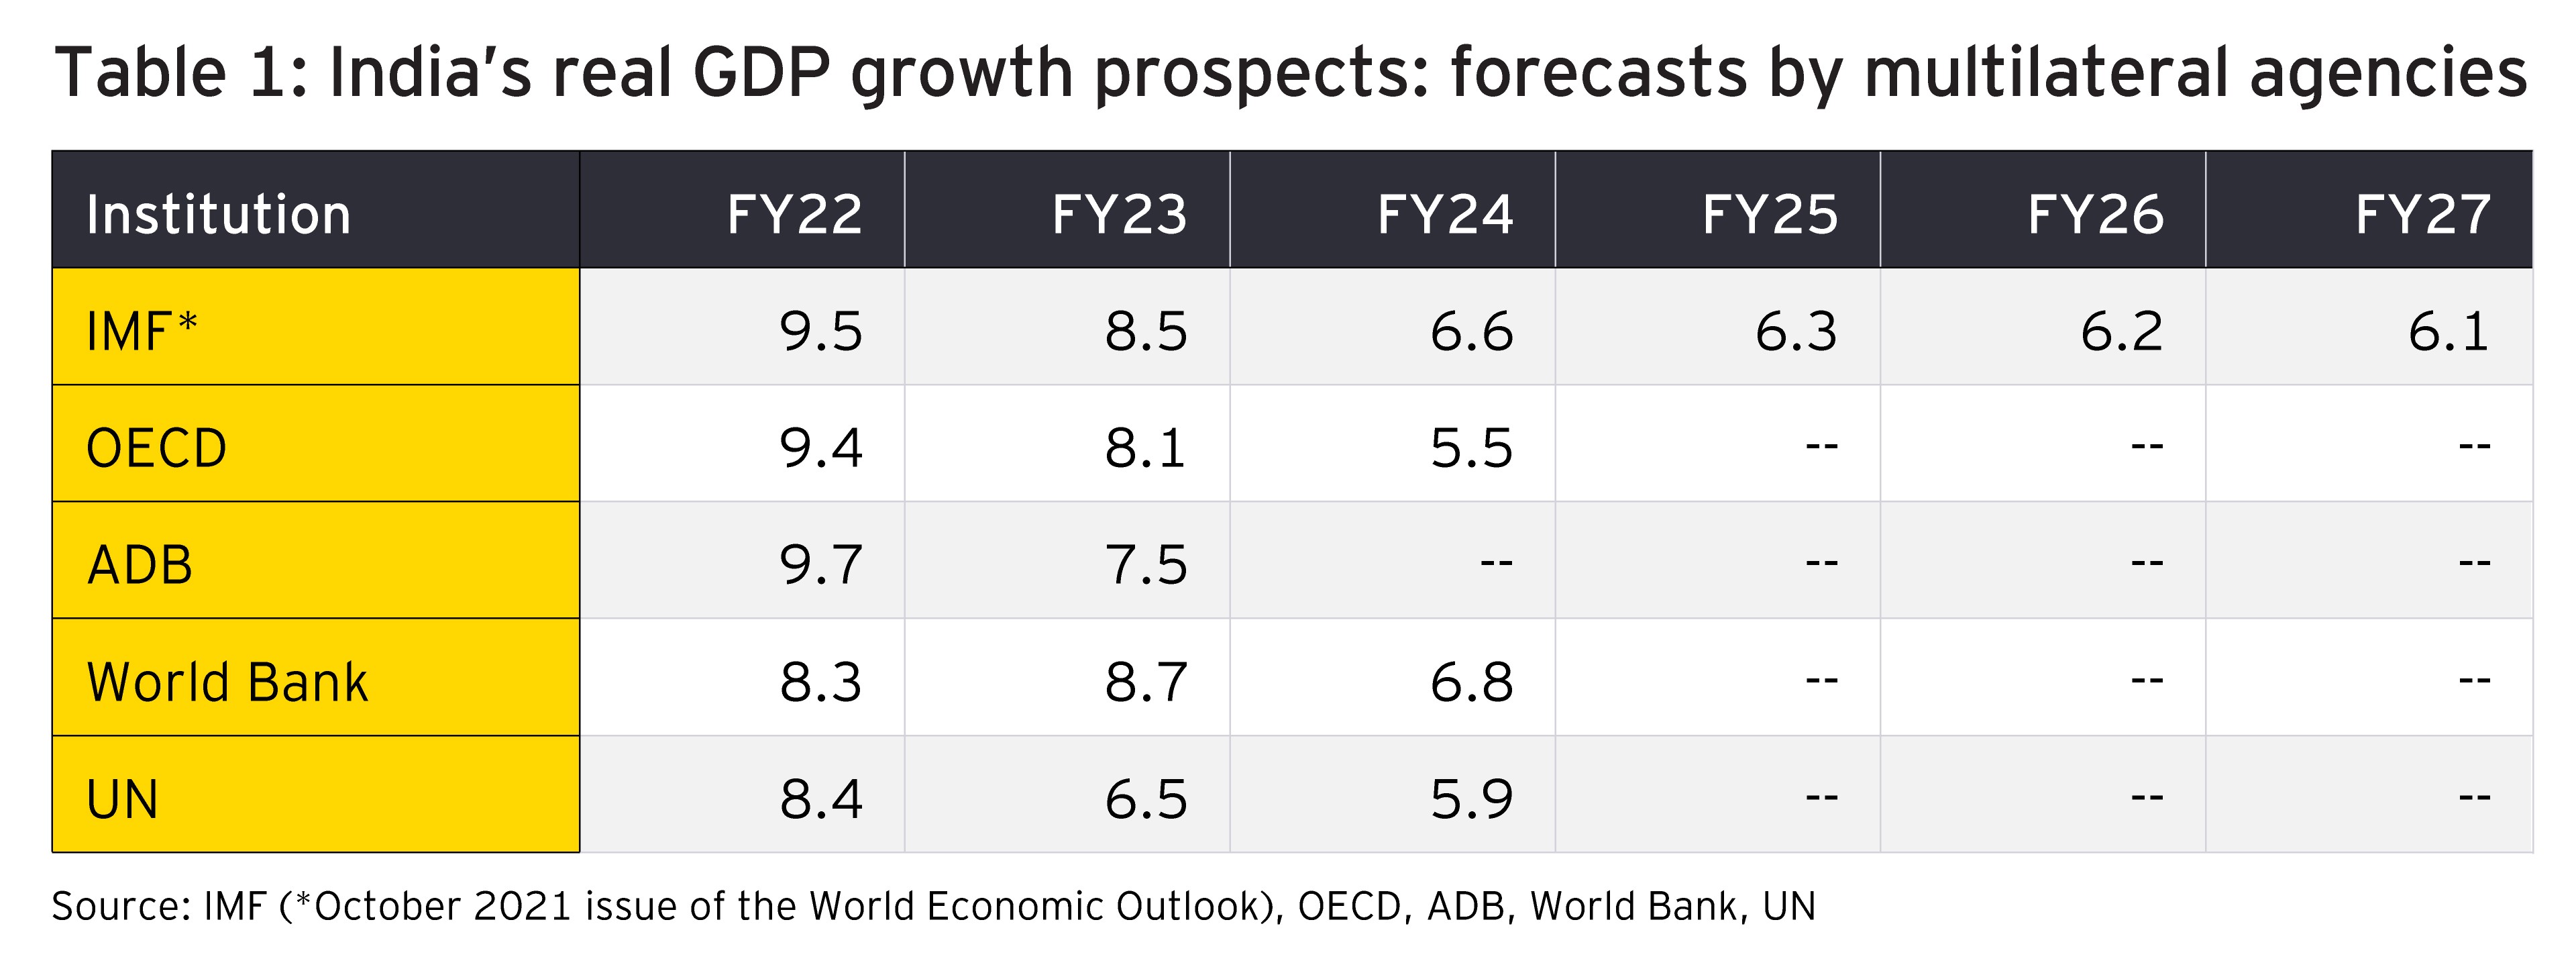 India’s real GDP growth prospects: forecasts by multilateral agencies